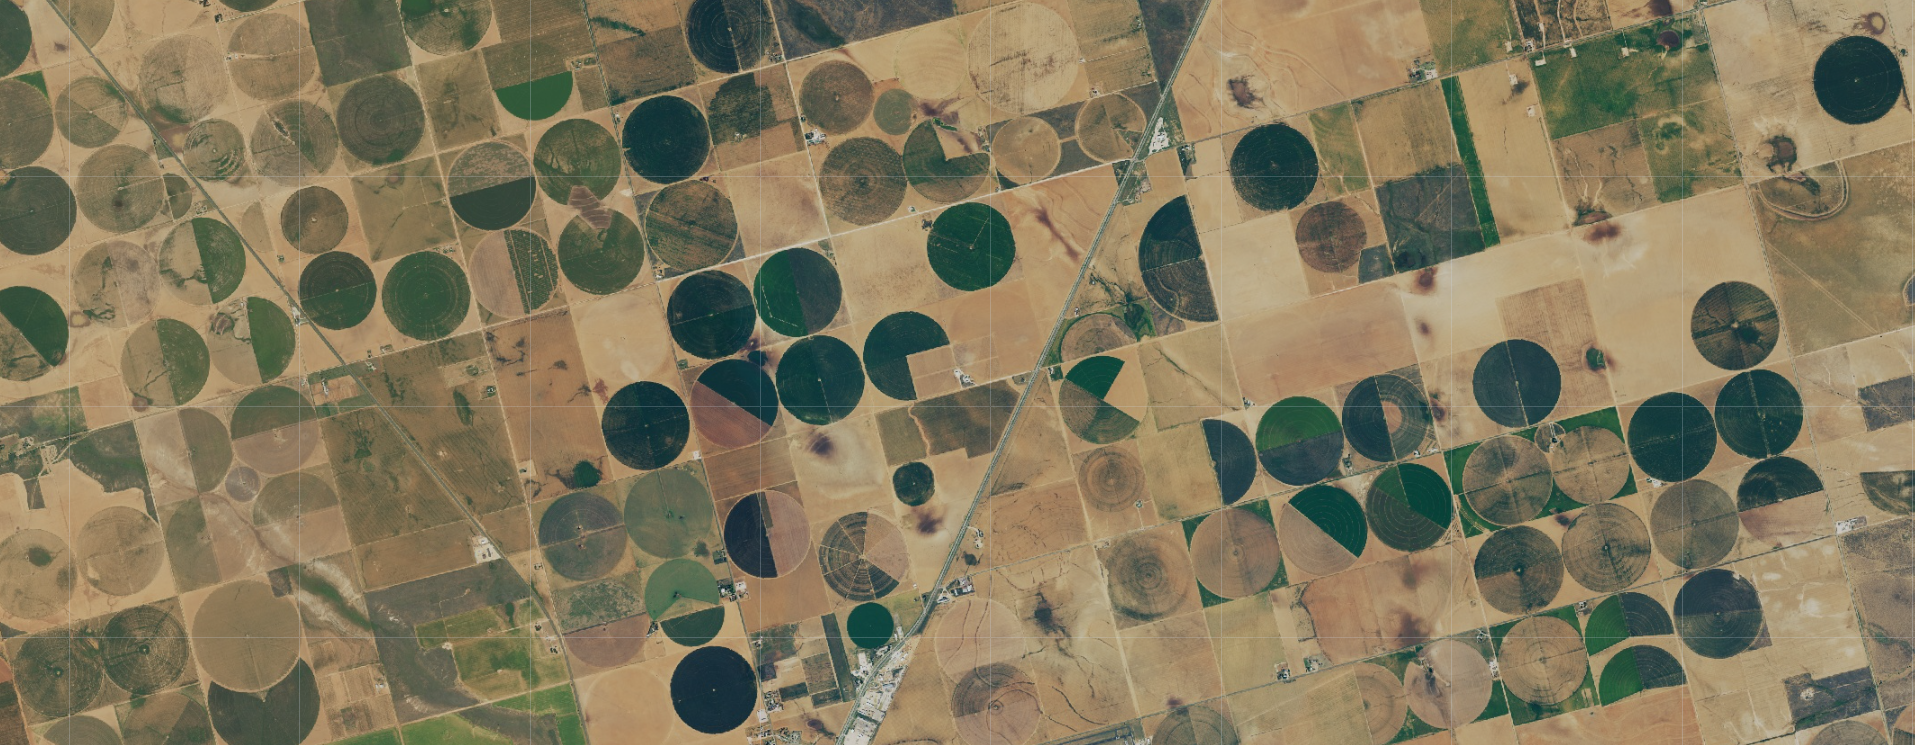 This image shows a satellite image of a field counting several central irrigation pivots.